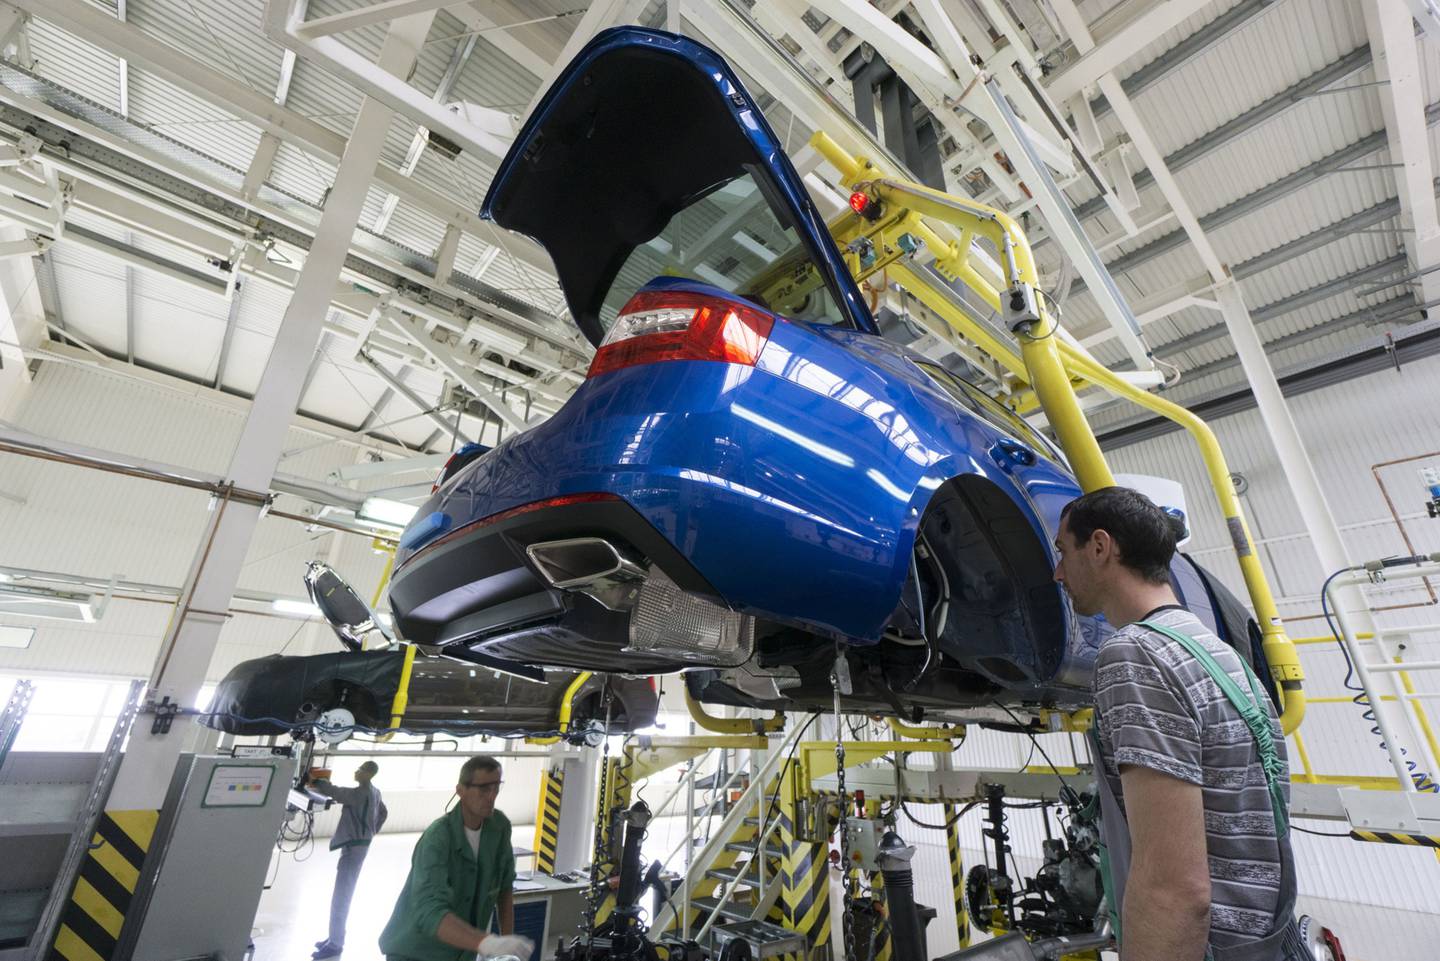 Ukraine is a vehicle assembly center, with assembly plants serving brands such as Skoda, which is owned by Volkswagen Groupdfd